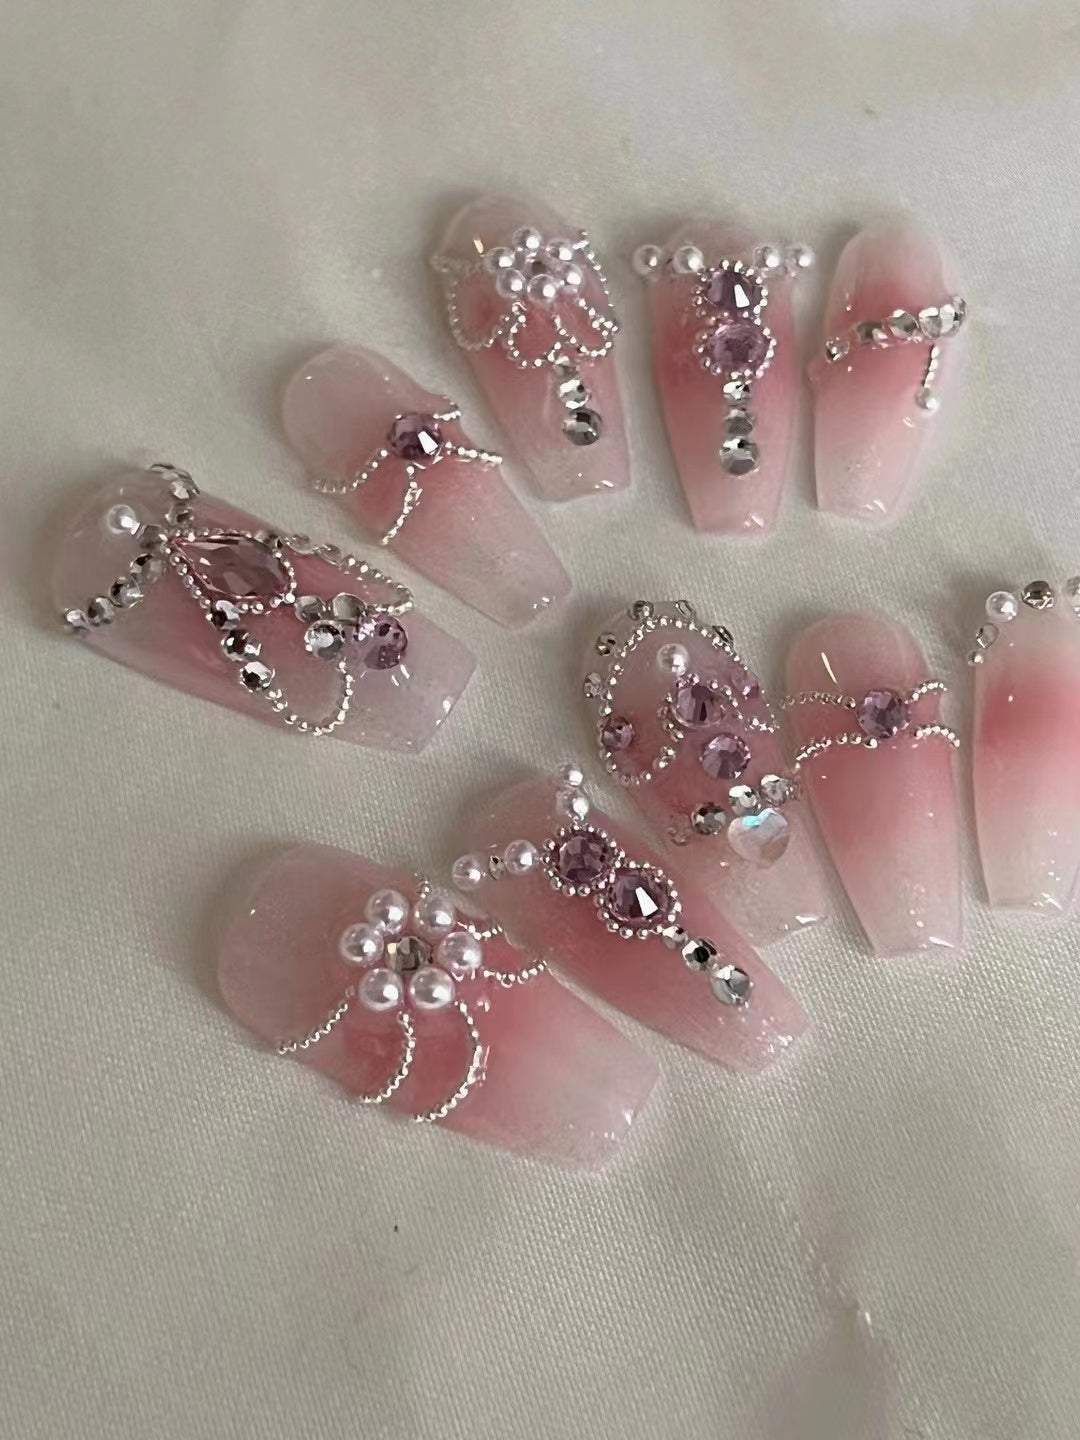 Haute Couture Nails can be privately sent to choose the shape of the nail